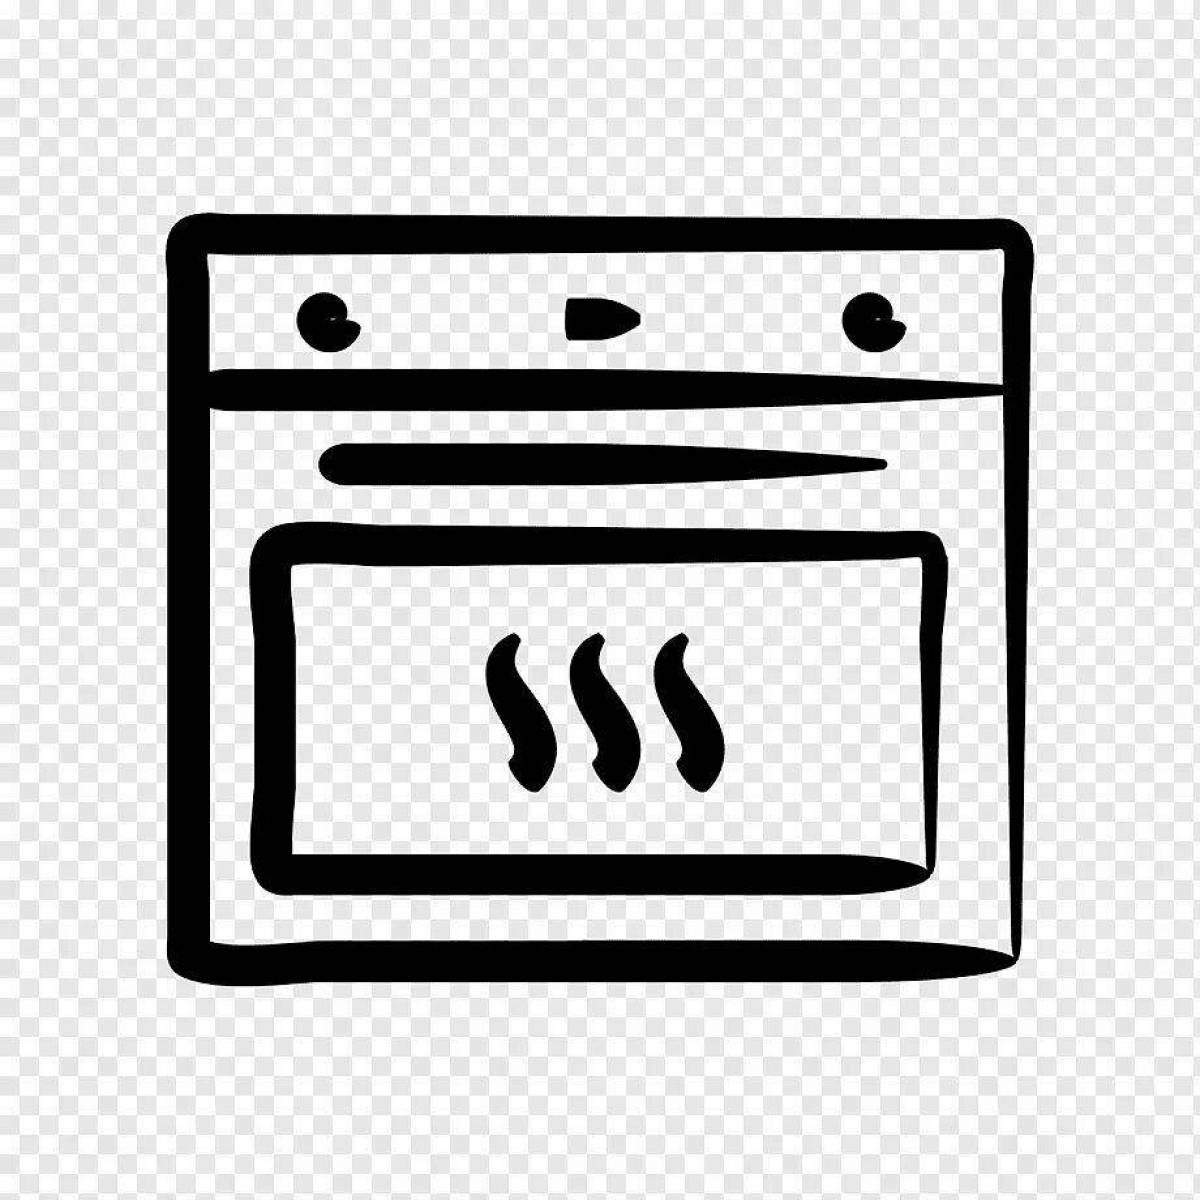 Animated oven coloring page